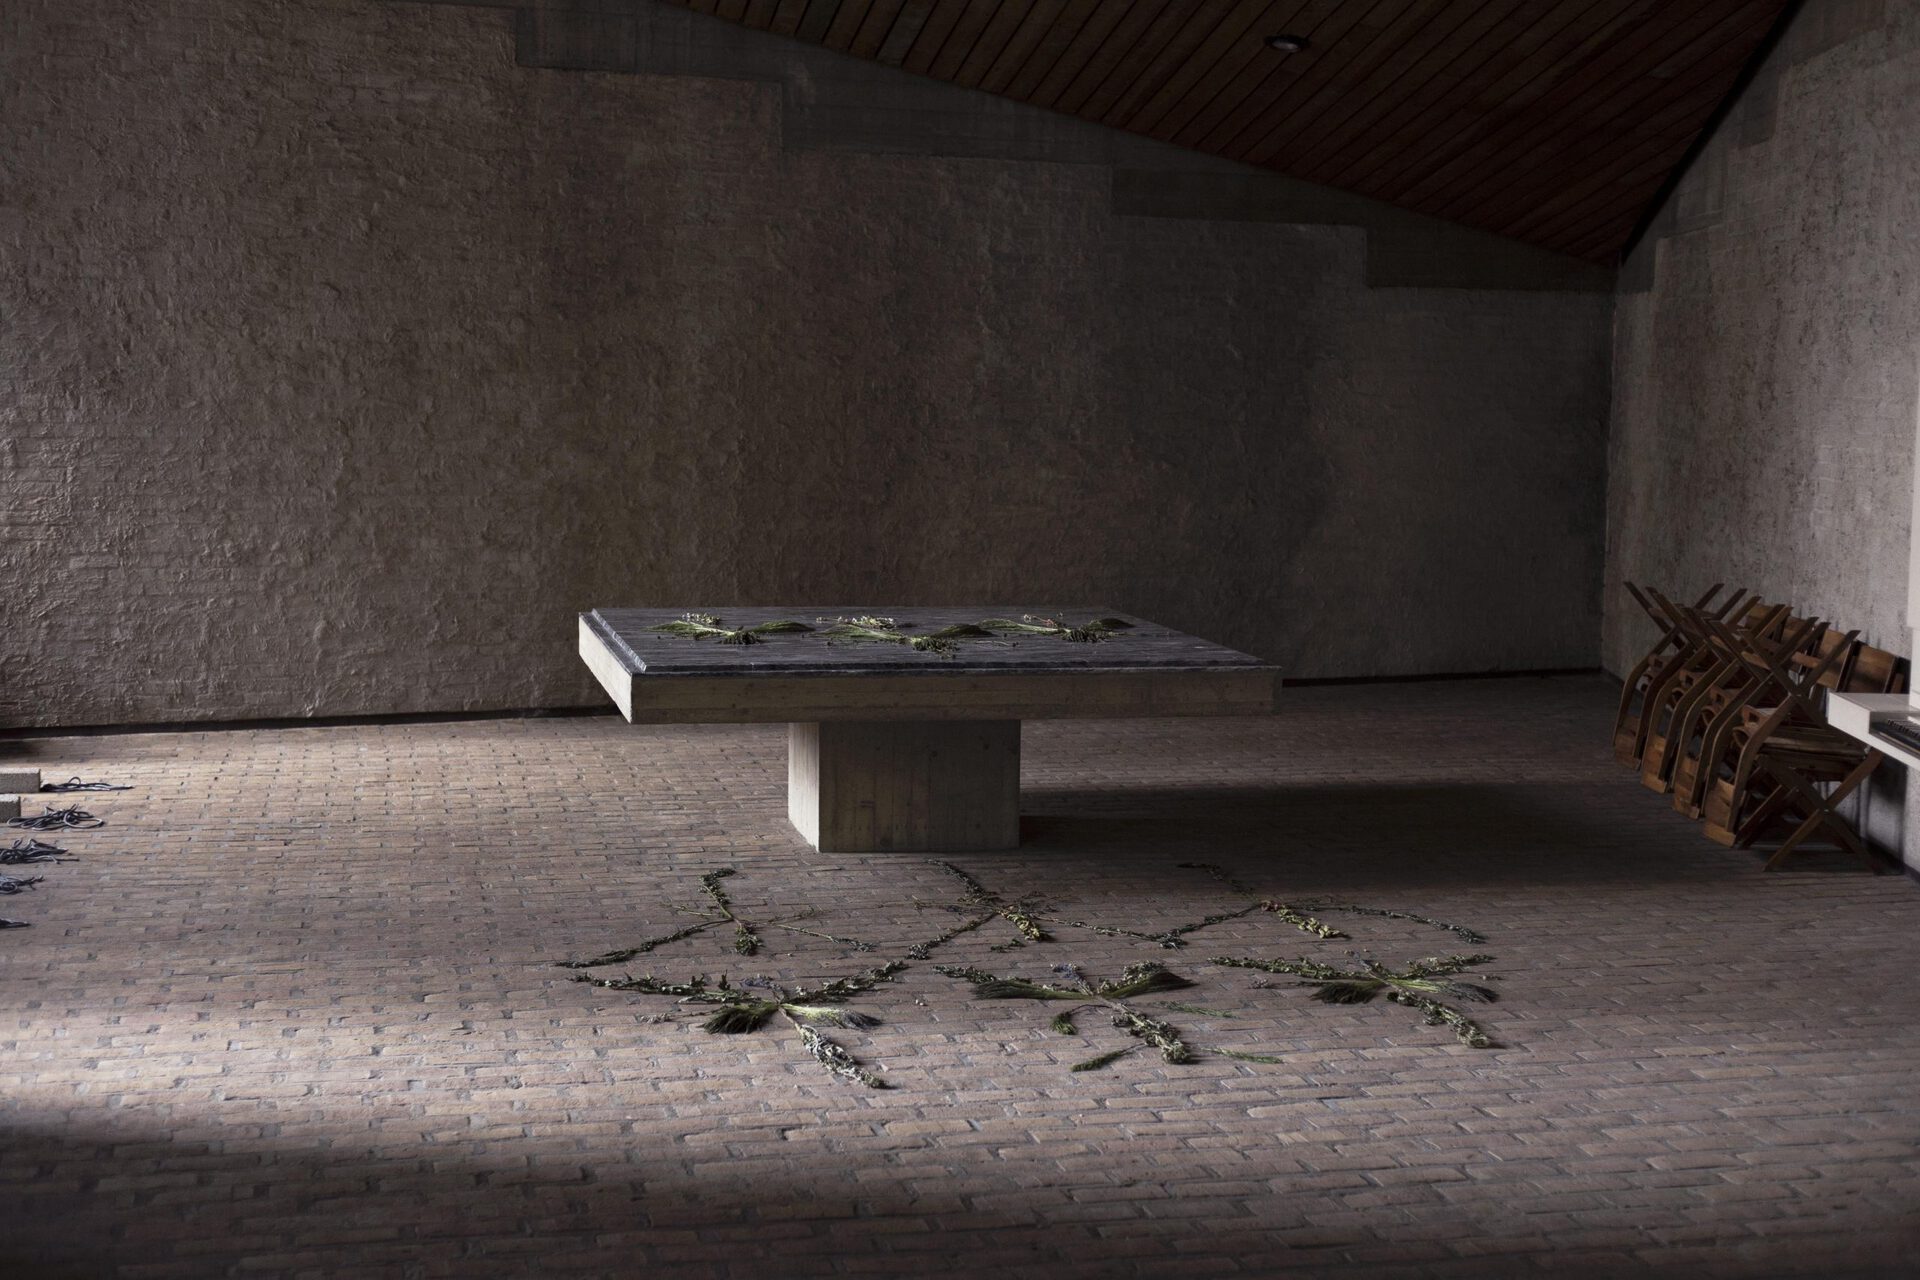 iida-simon in collaboration with morgane fontaine and pauline millet, weeds, 2022, installation, 400cmx250cm